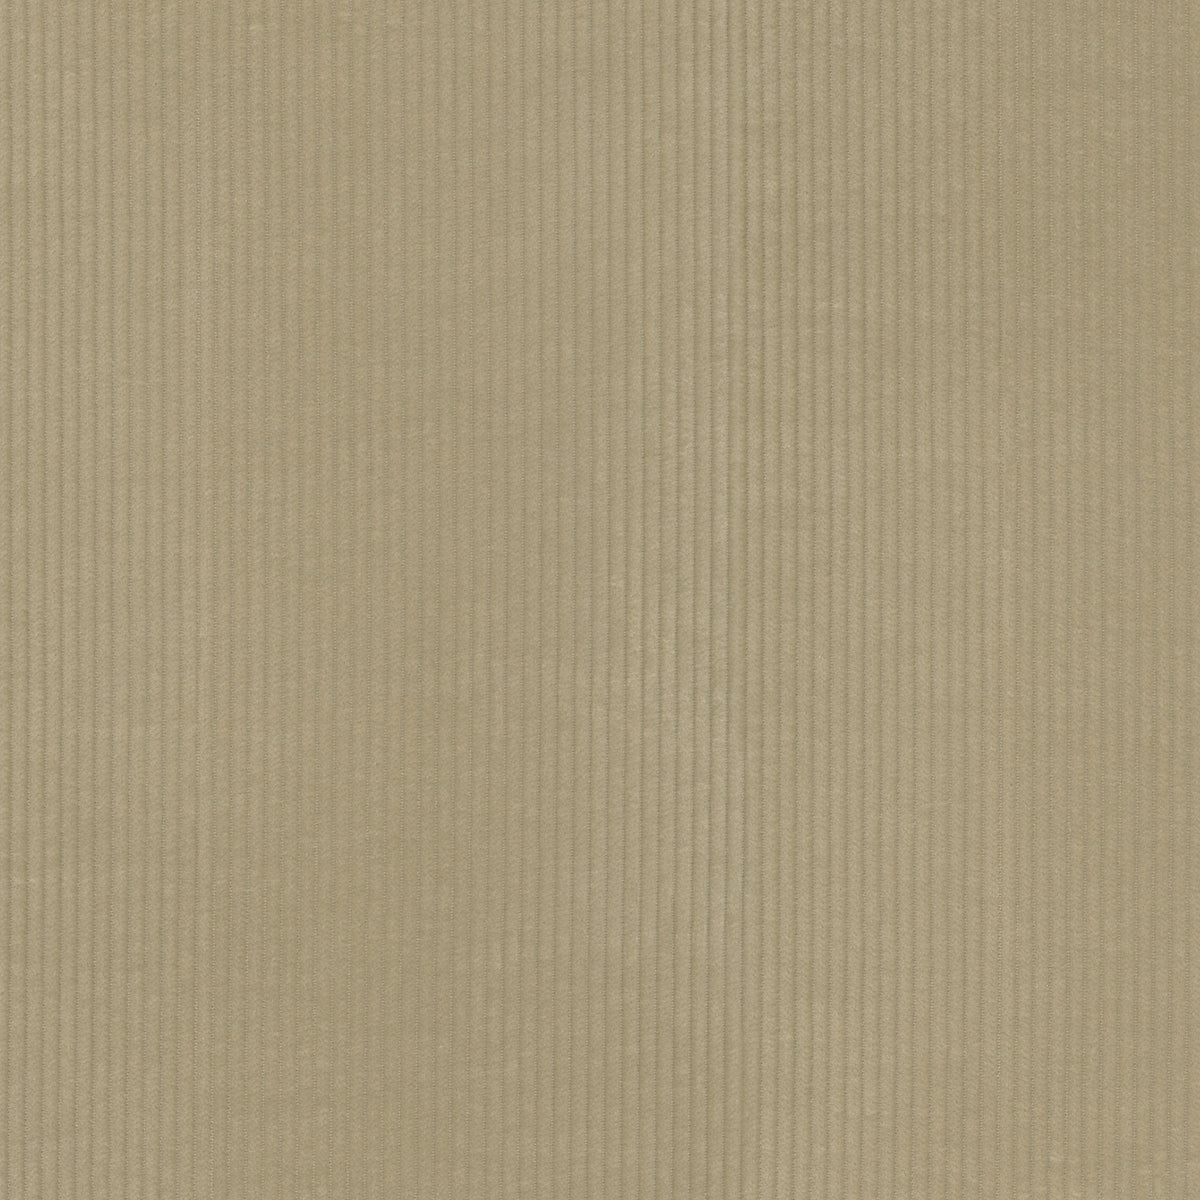 P/K Lifestyles Wales - Sand 412044 Upholstery Fabric